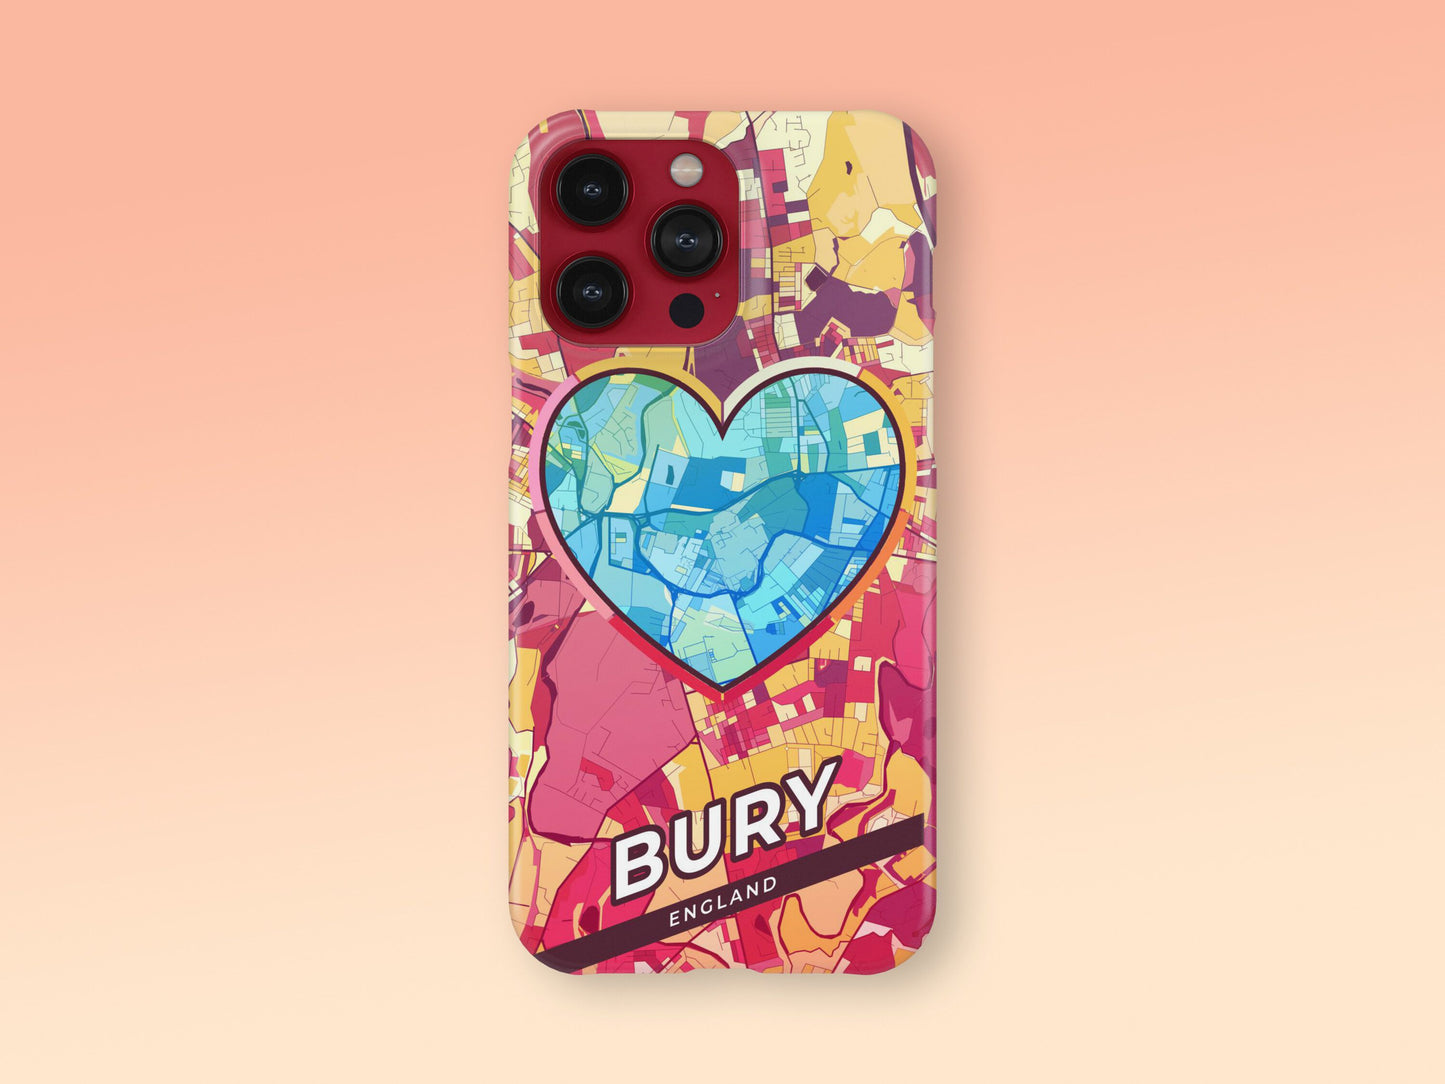 Bury England slim phone case with colorful icon. Birthday, wedding or housewarming gift. Couple match cases. 2